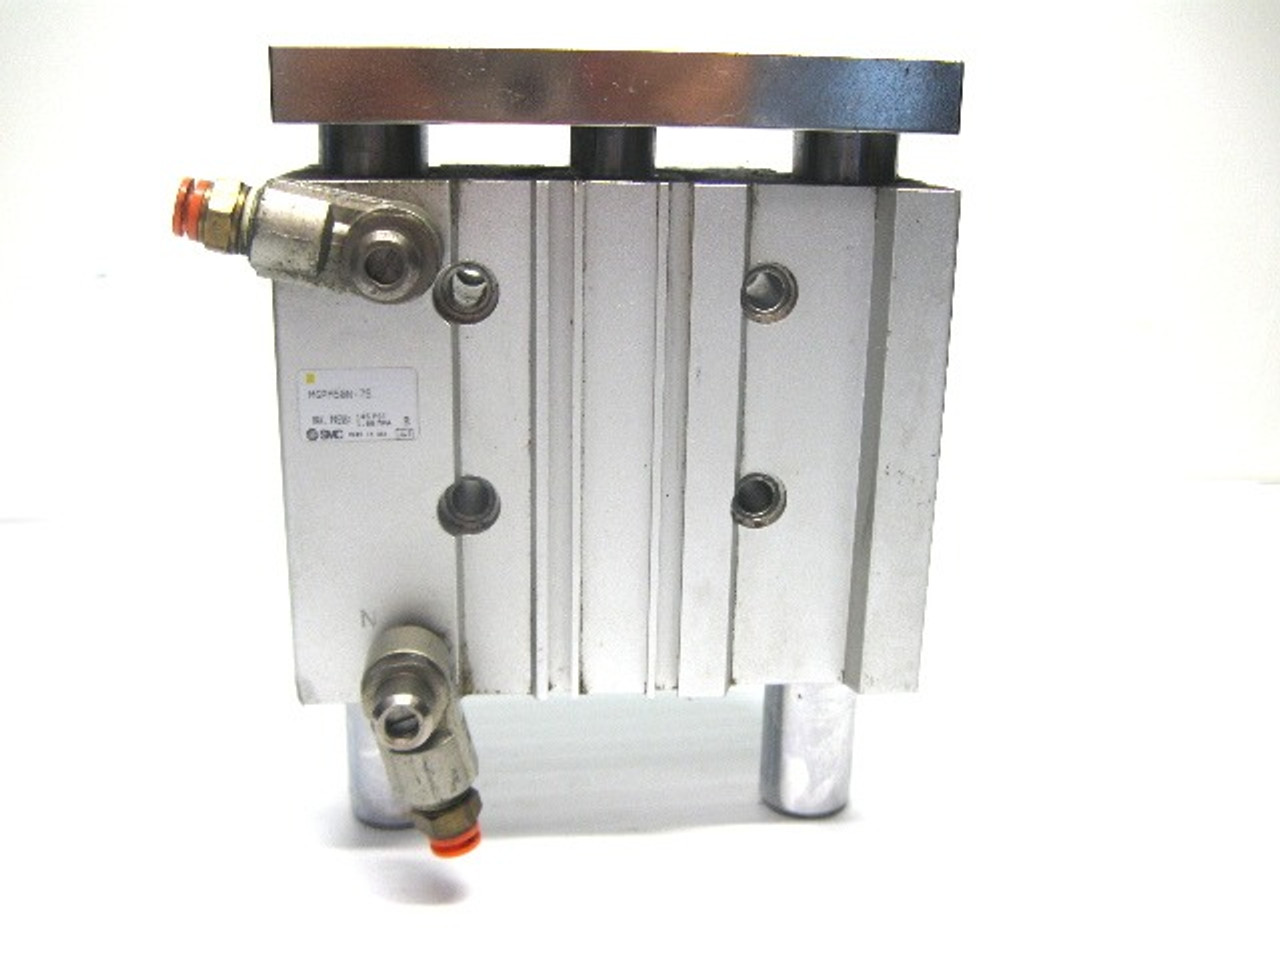 SMC MGPM50N-75 Pneumatic Guide Cylinder 50mm Bore 75mm Stroke